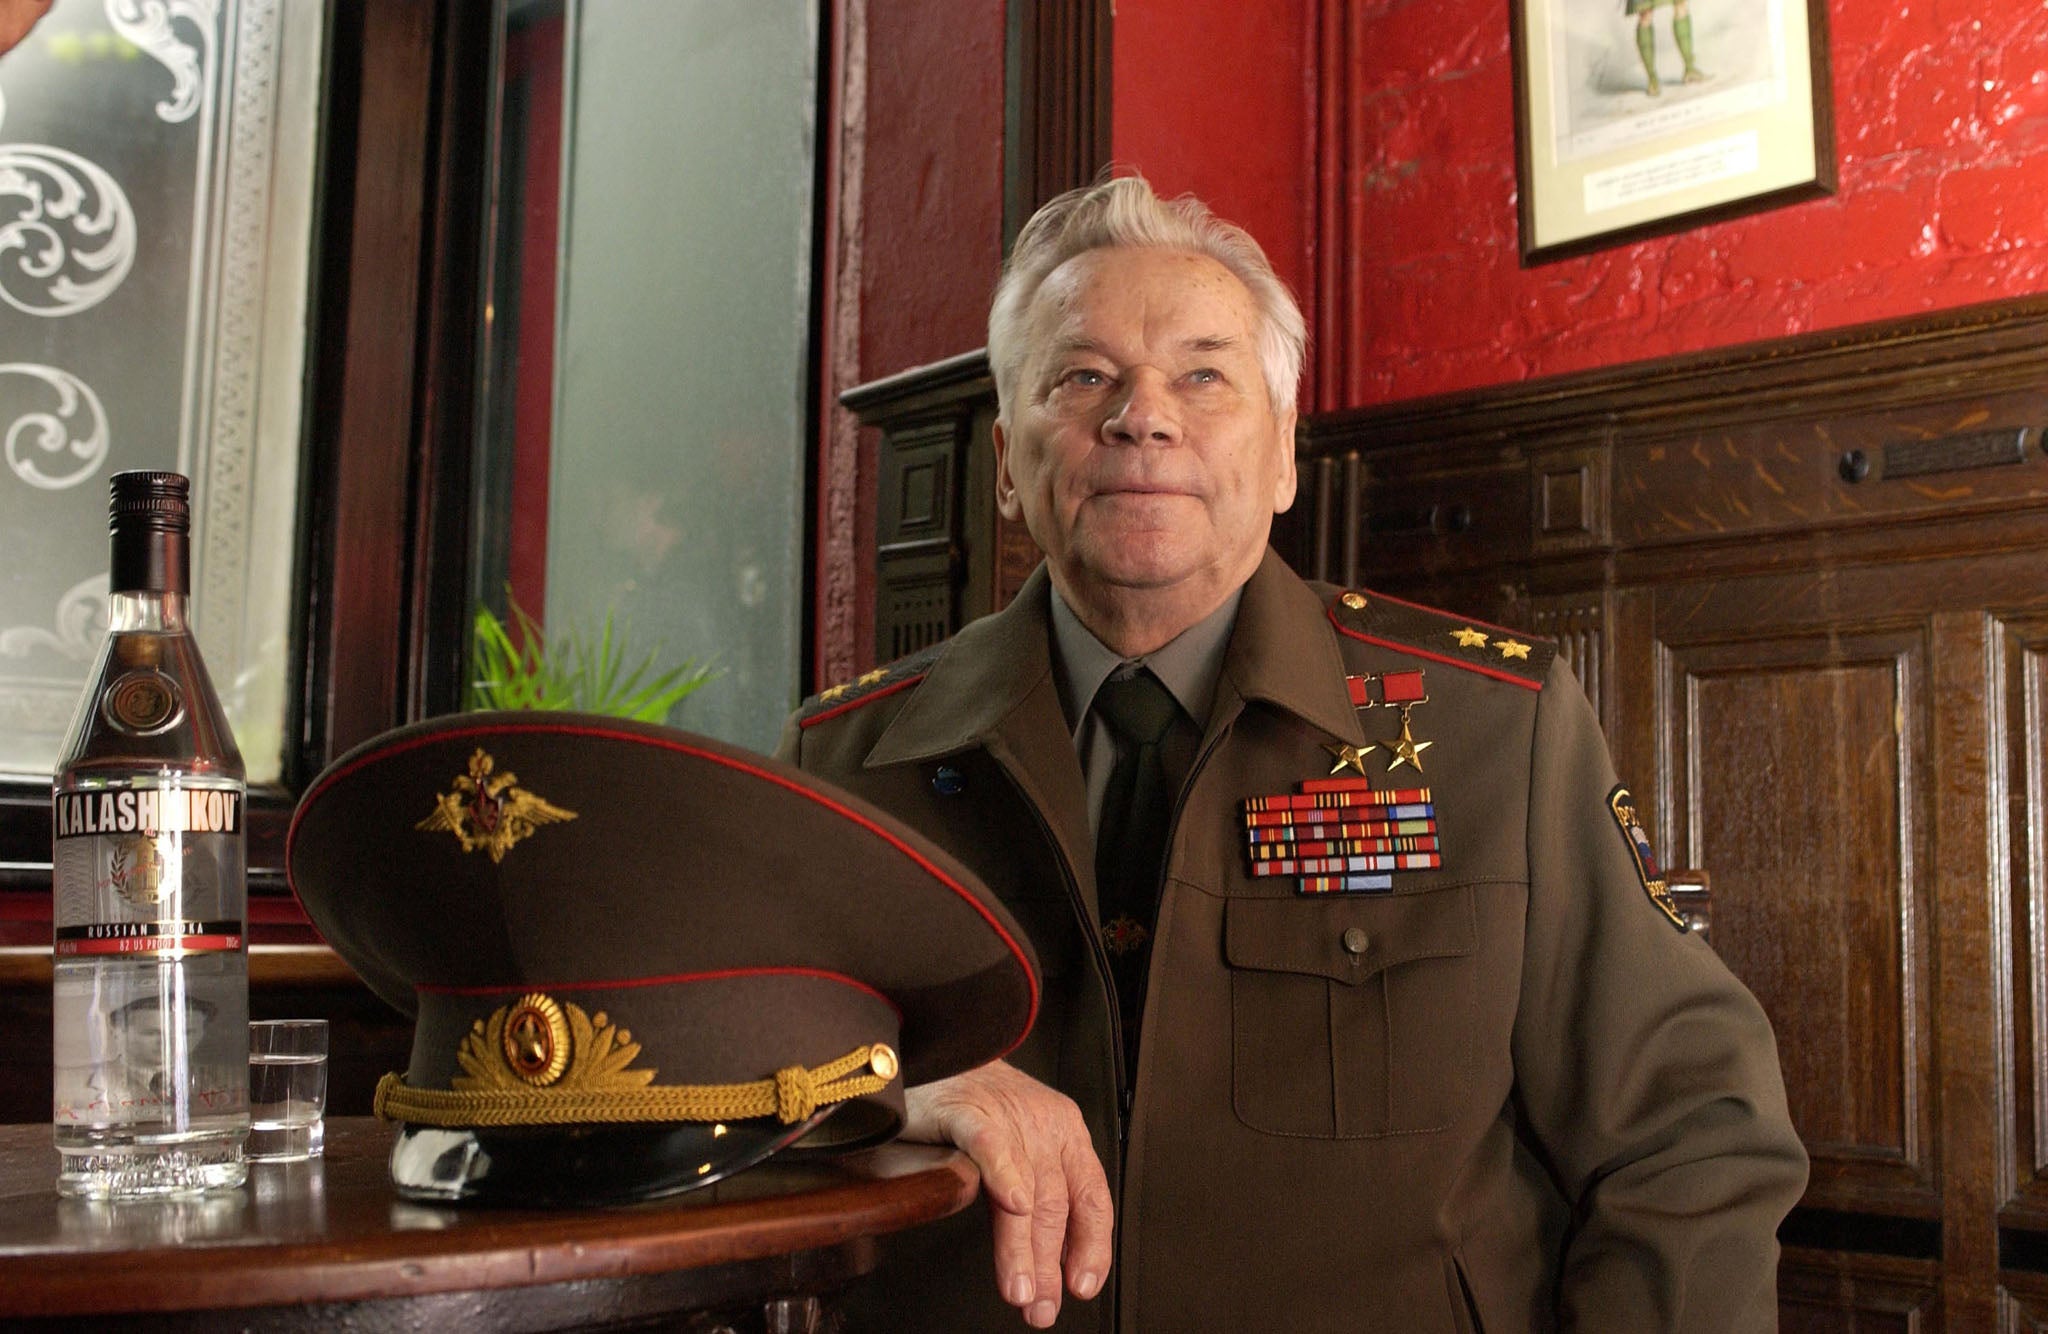 With his stocky frame, and his general’s uniform smothered with medals, Mikhail Kalashnikov looked the quintessential Soviet military veteran